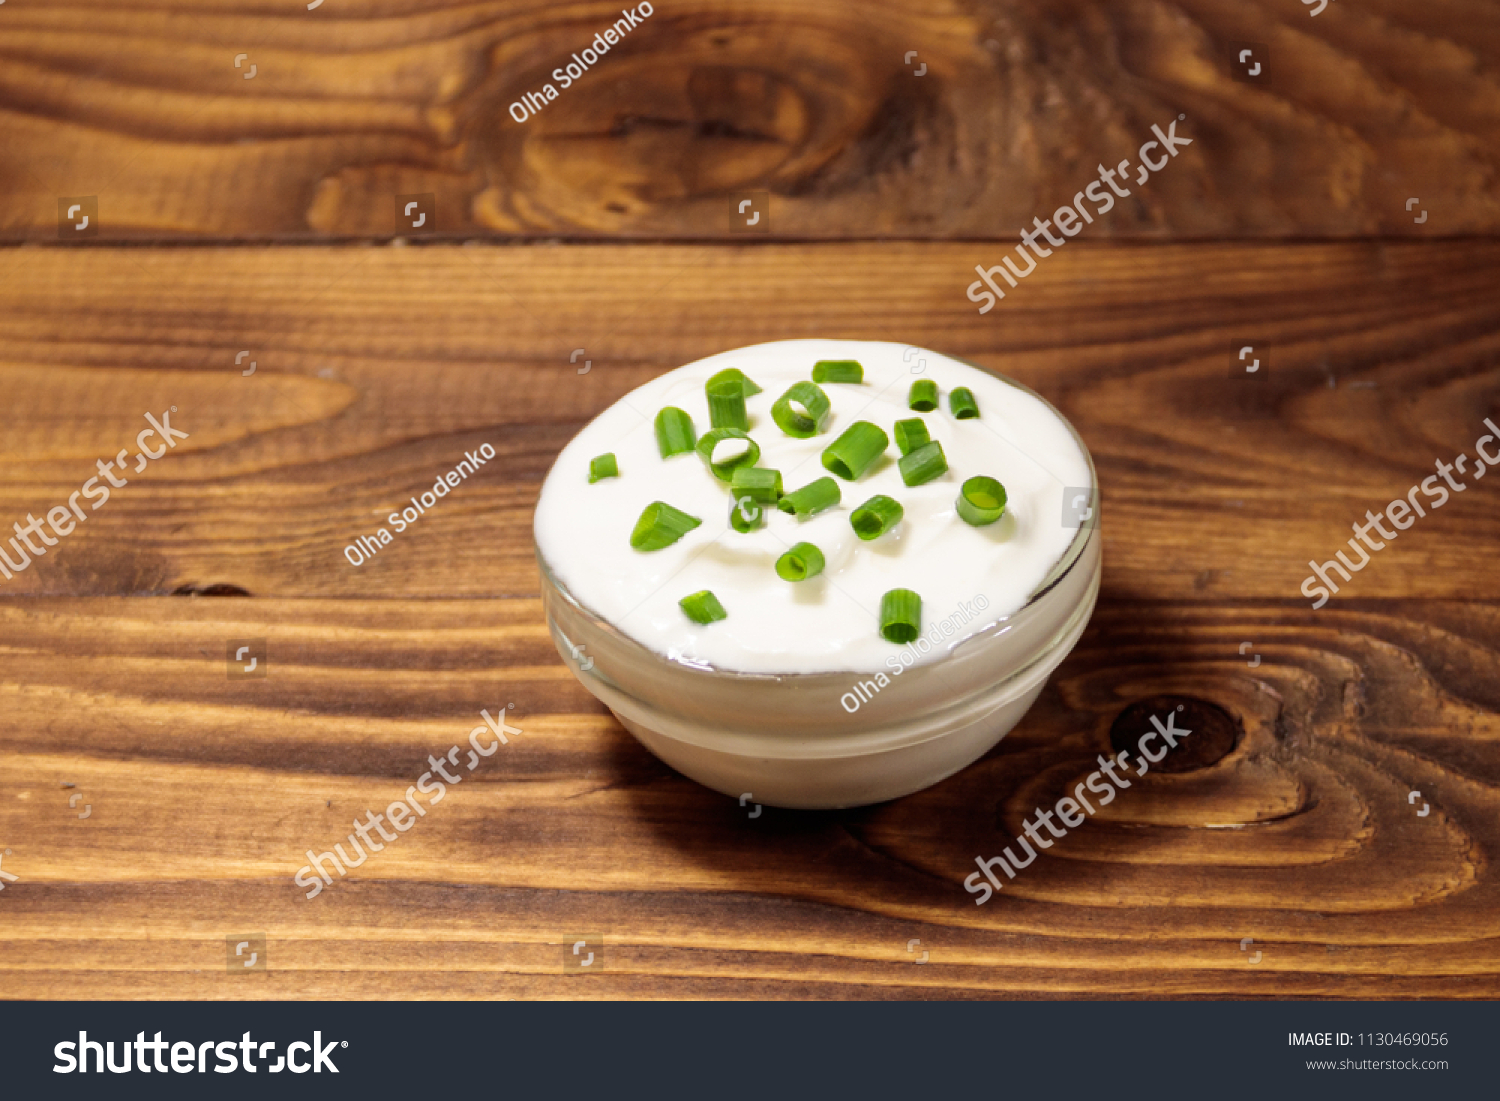 Sour cream with green onion in glass bowl on wooden table #1130469056